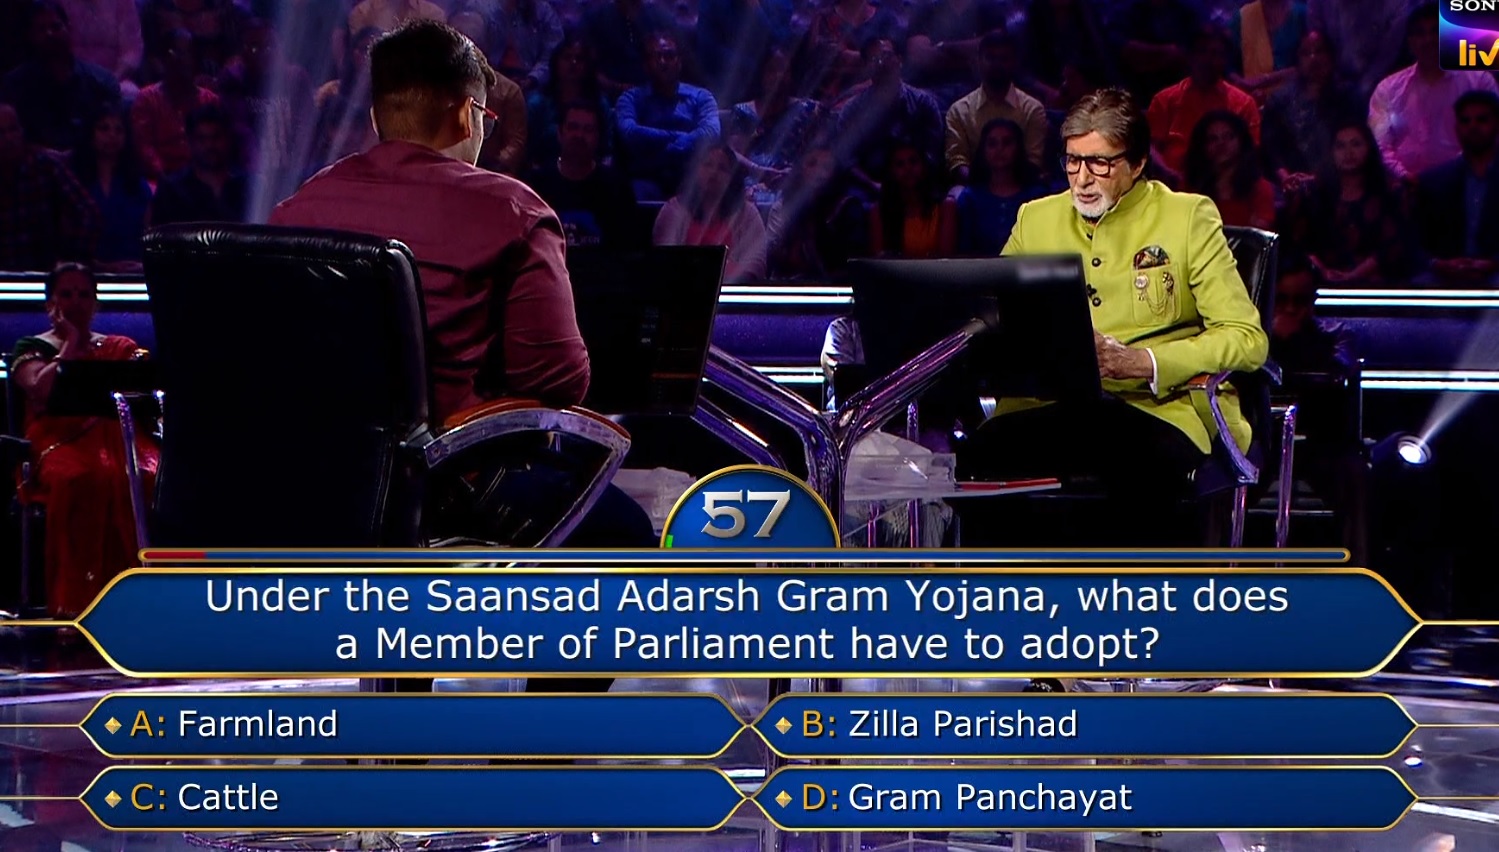 Ques : Under the Saansad Adarsh Gram Yojana, what does a member of Parliament have to adopt?